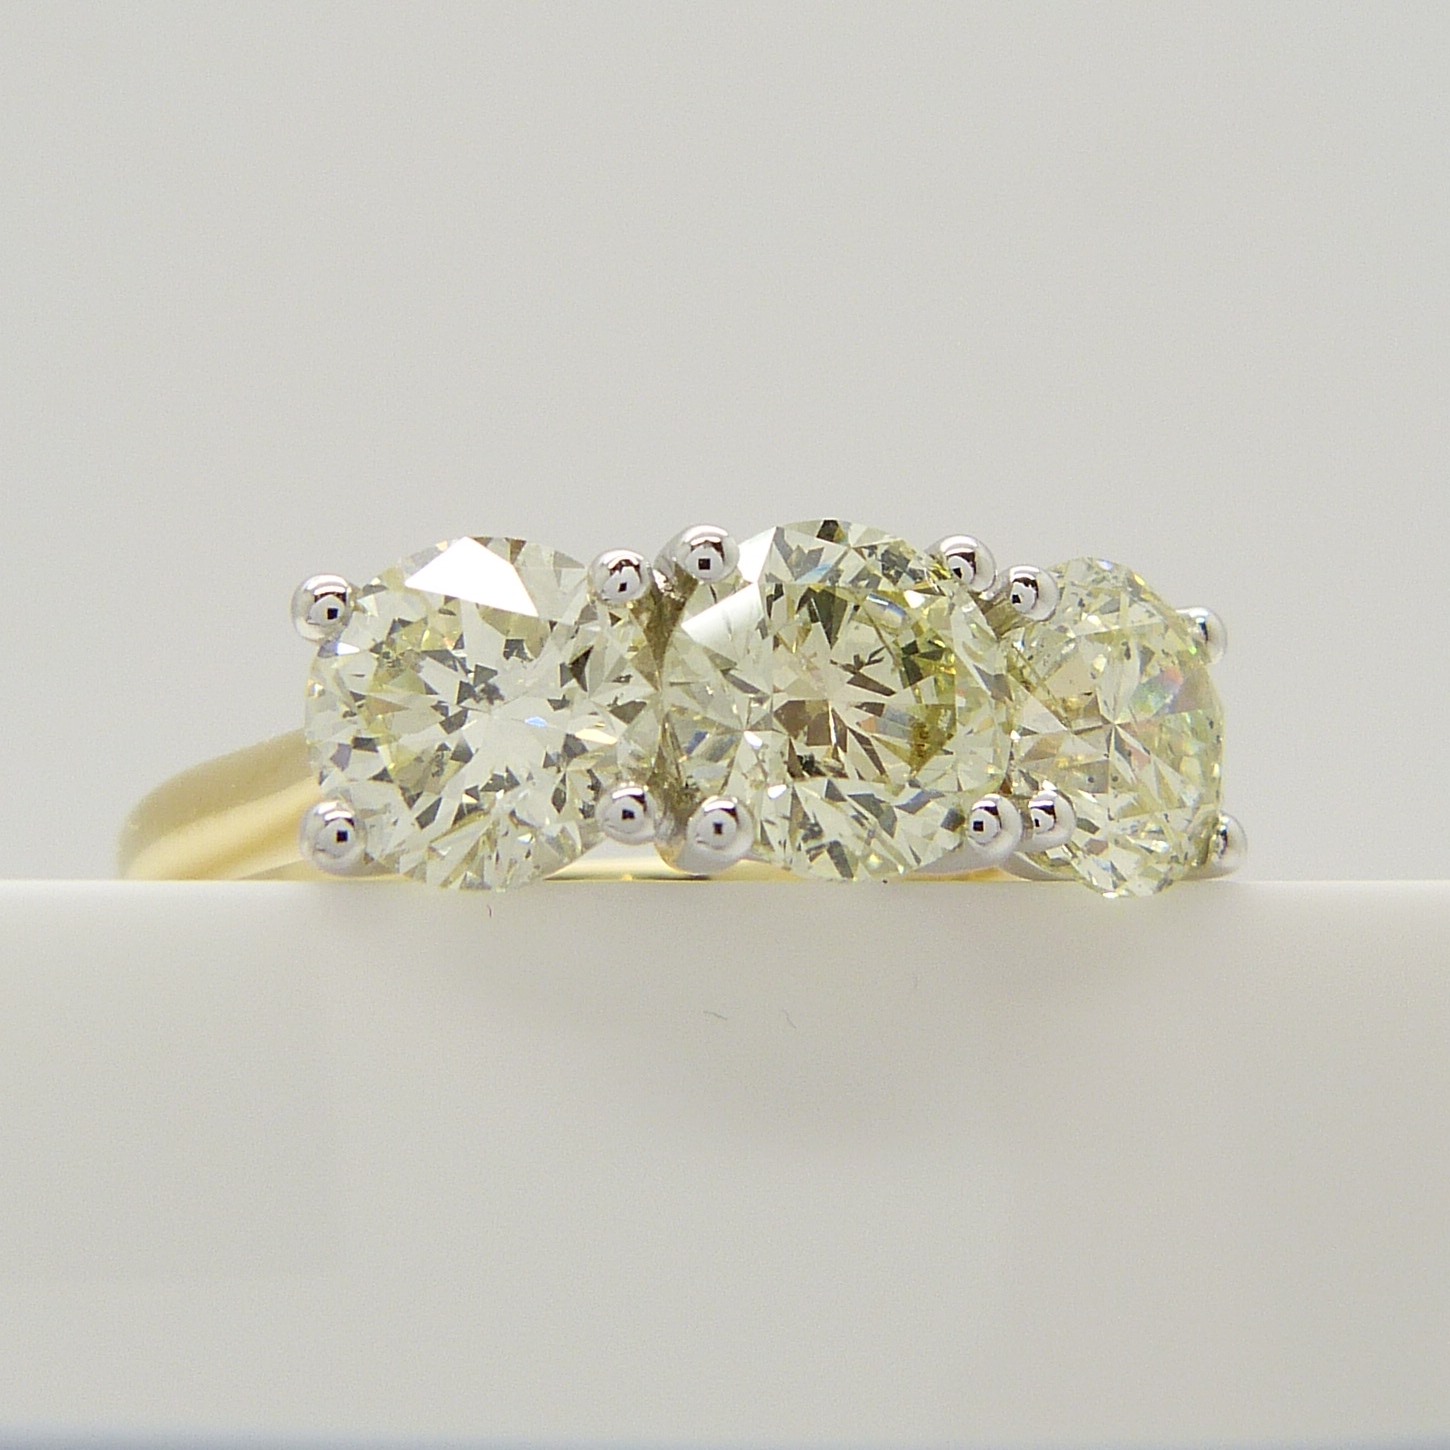 A stunning WGI certificated 3.11 carat diamond 3-stone ring in 18ct yellow and white gold - Image 2 of 8